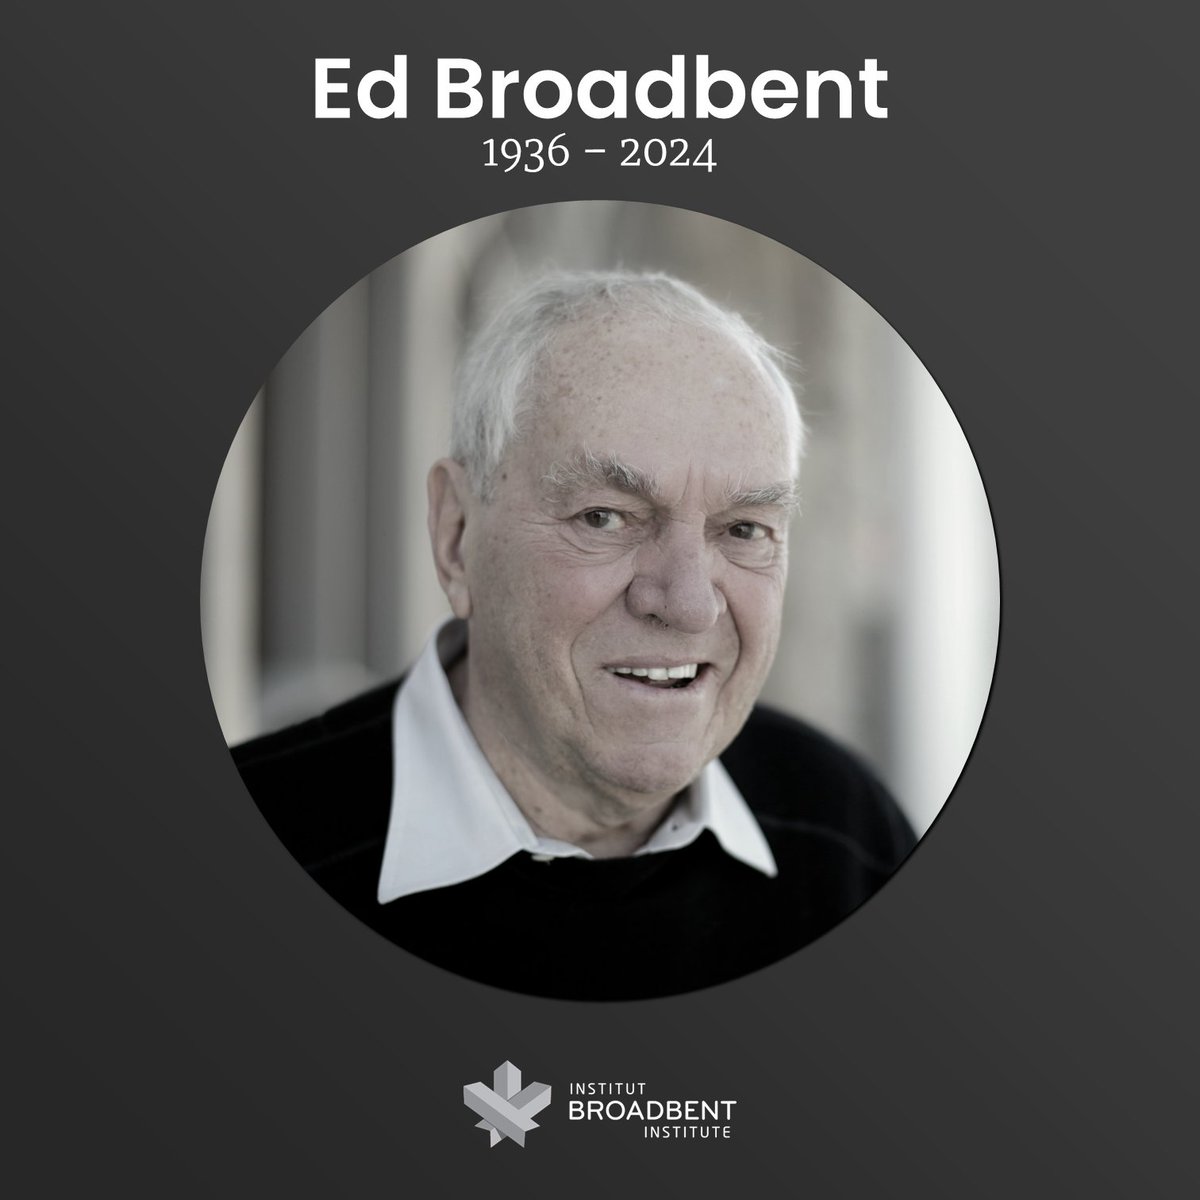 It is with the heaviest of hearts that the Broadbent Institute announces the passing of our founder, Ed Broadbent. Read our full statement at broadbentinstitute.ca/statement-pass…